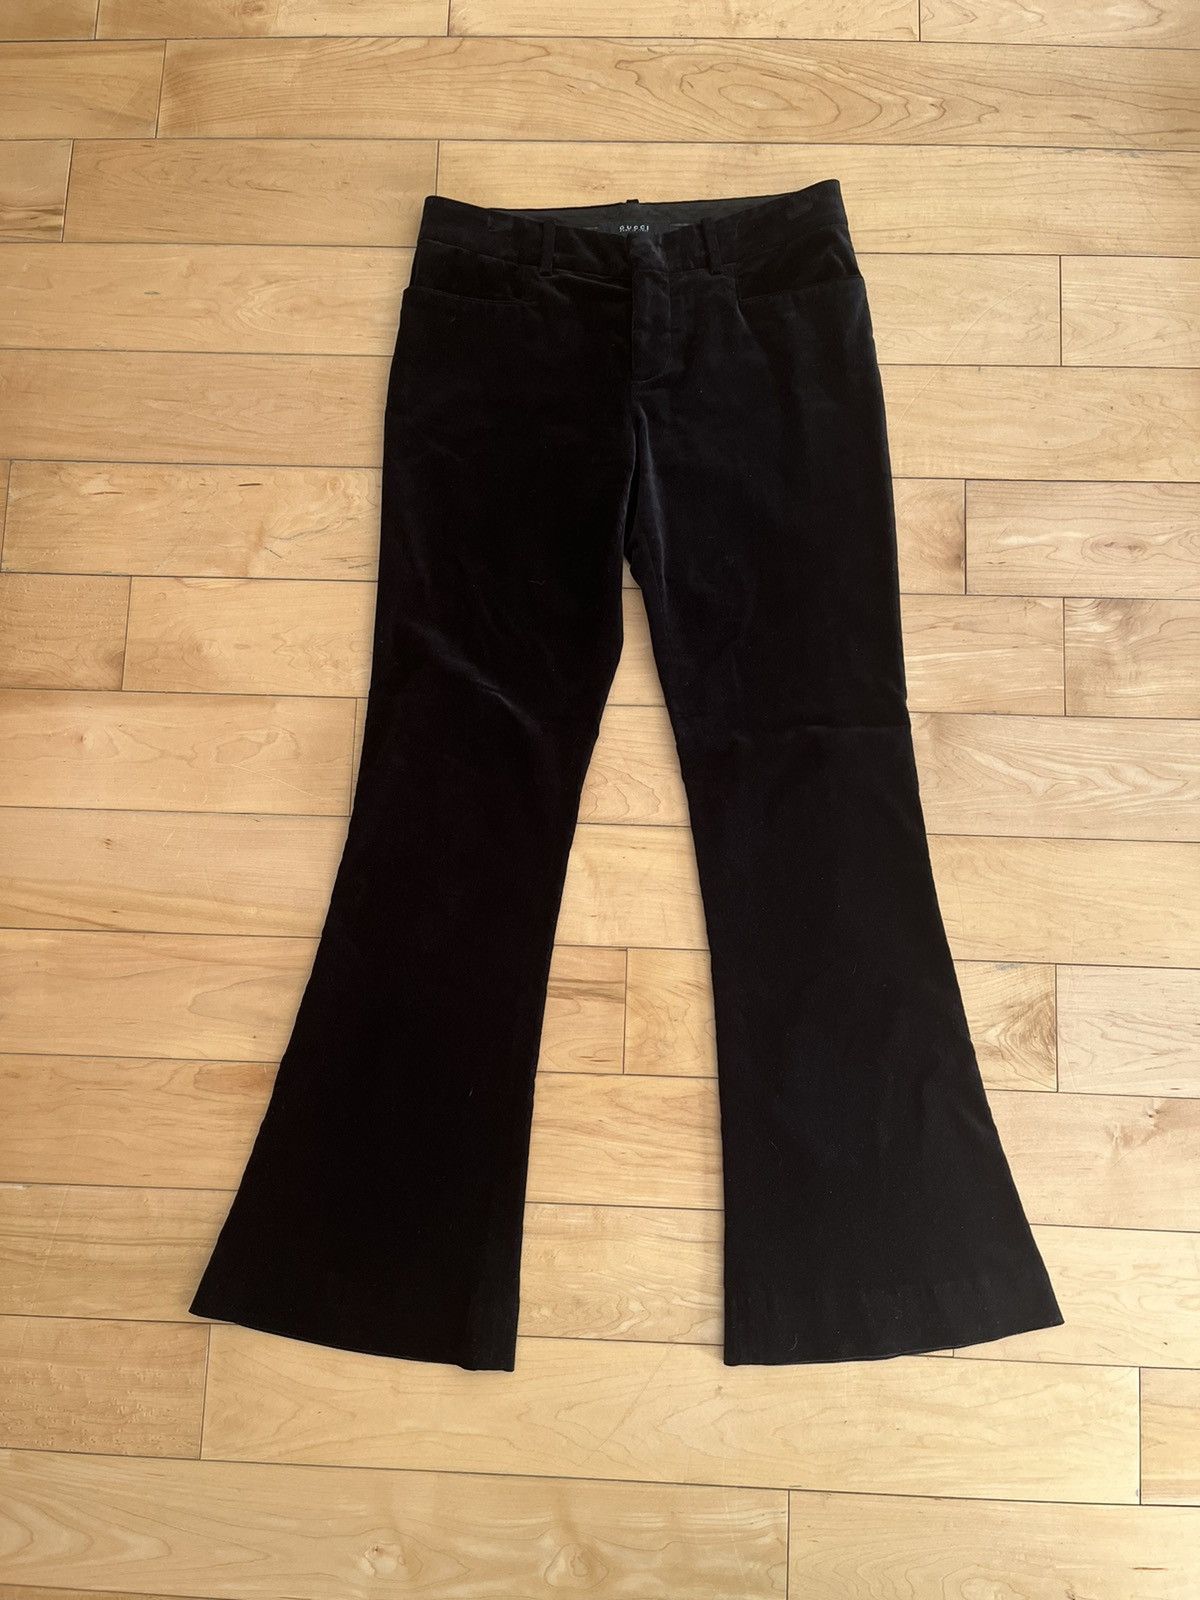 FW95 Gucci by Tom Ford Velvet Flared Trousers - 2